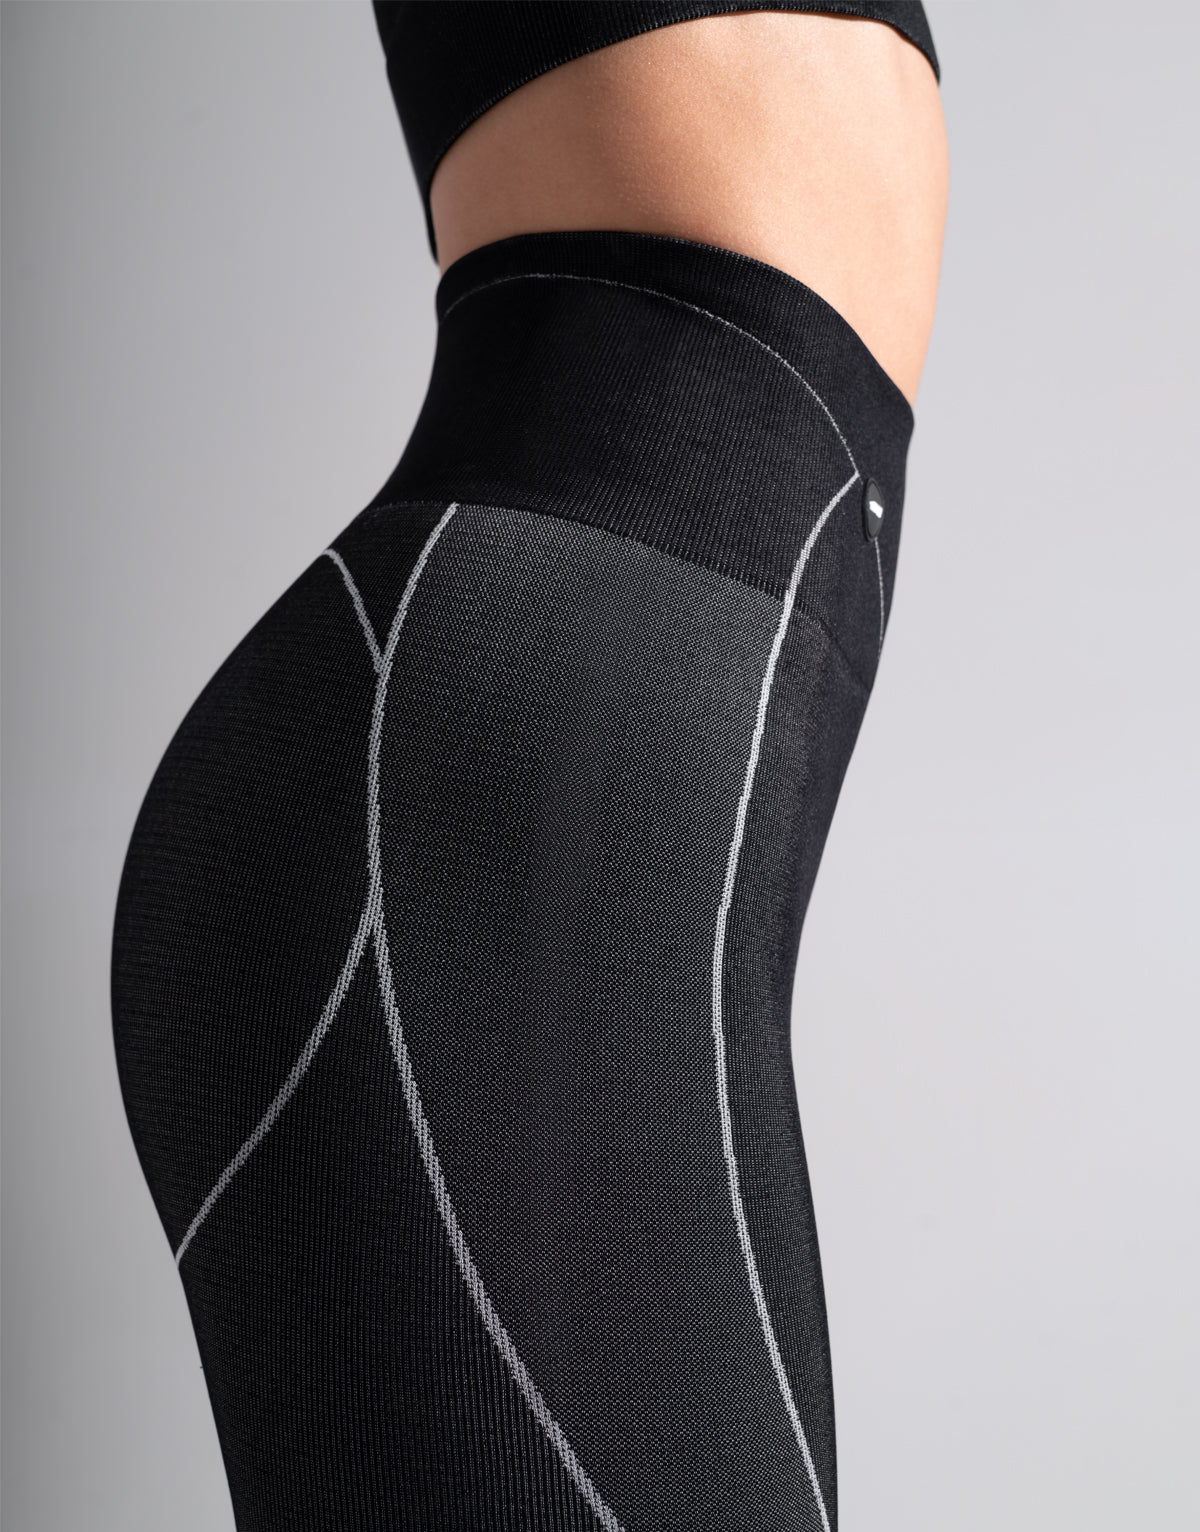 PACE LINES BLACK SEAMLESS